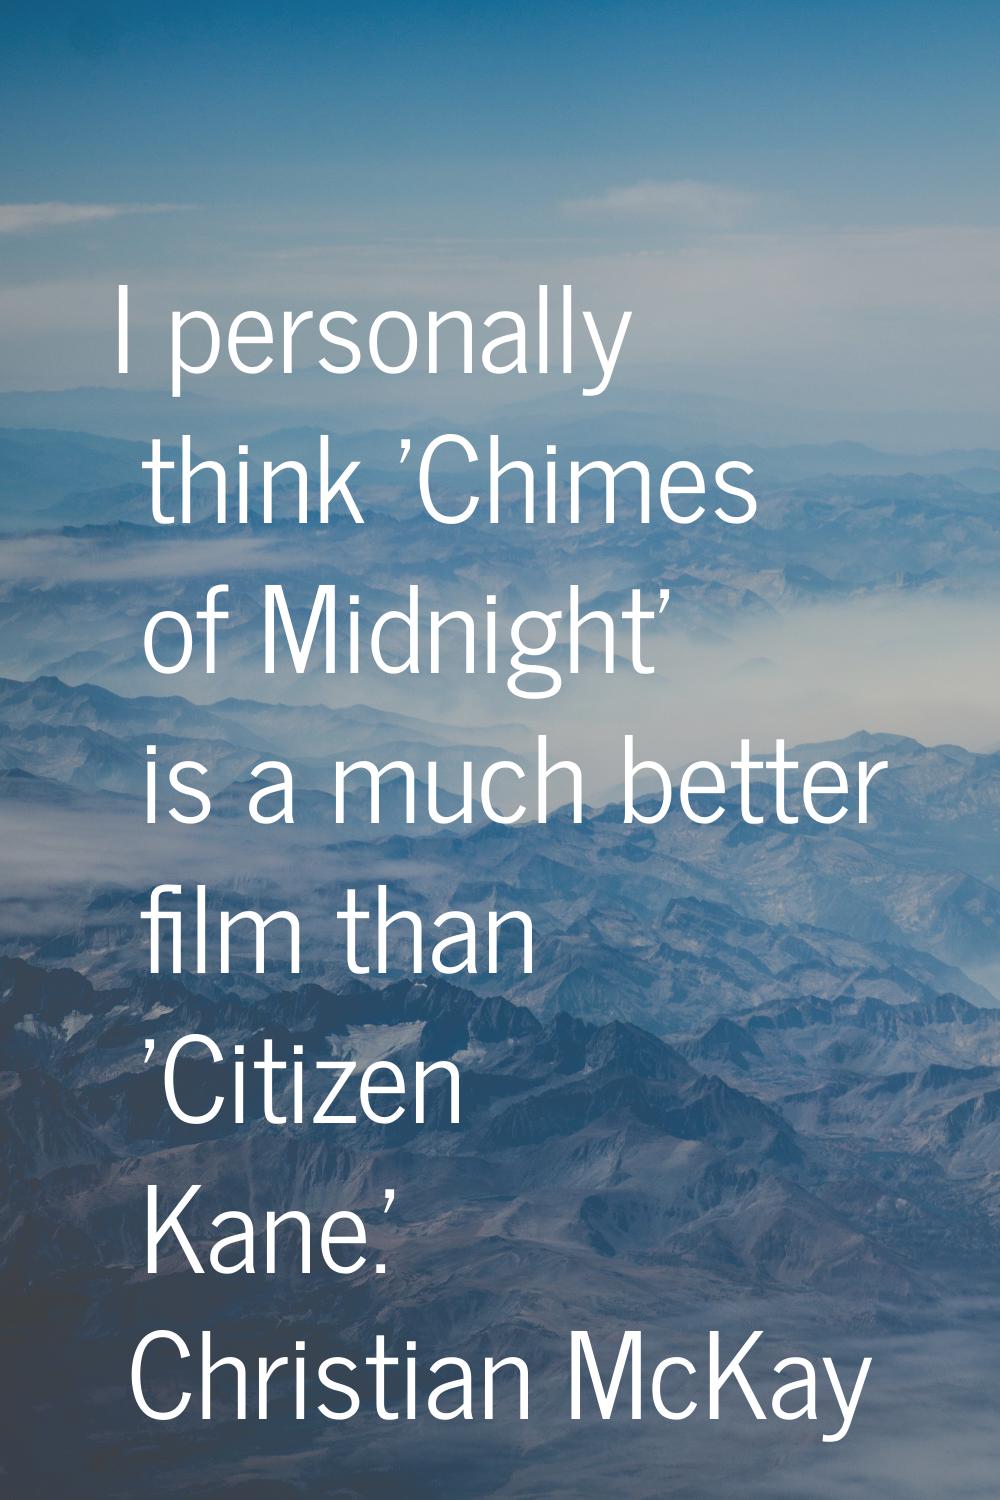 I personally think 'Chimes of Midnight' is a much better film than 'Citizen Kane.'